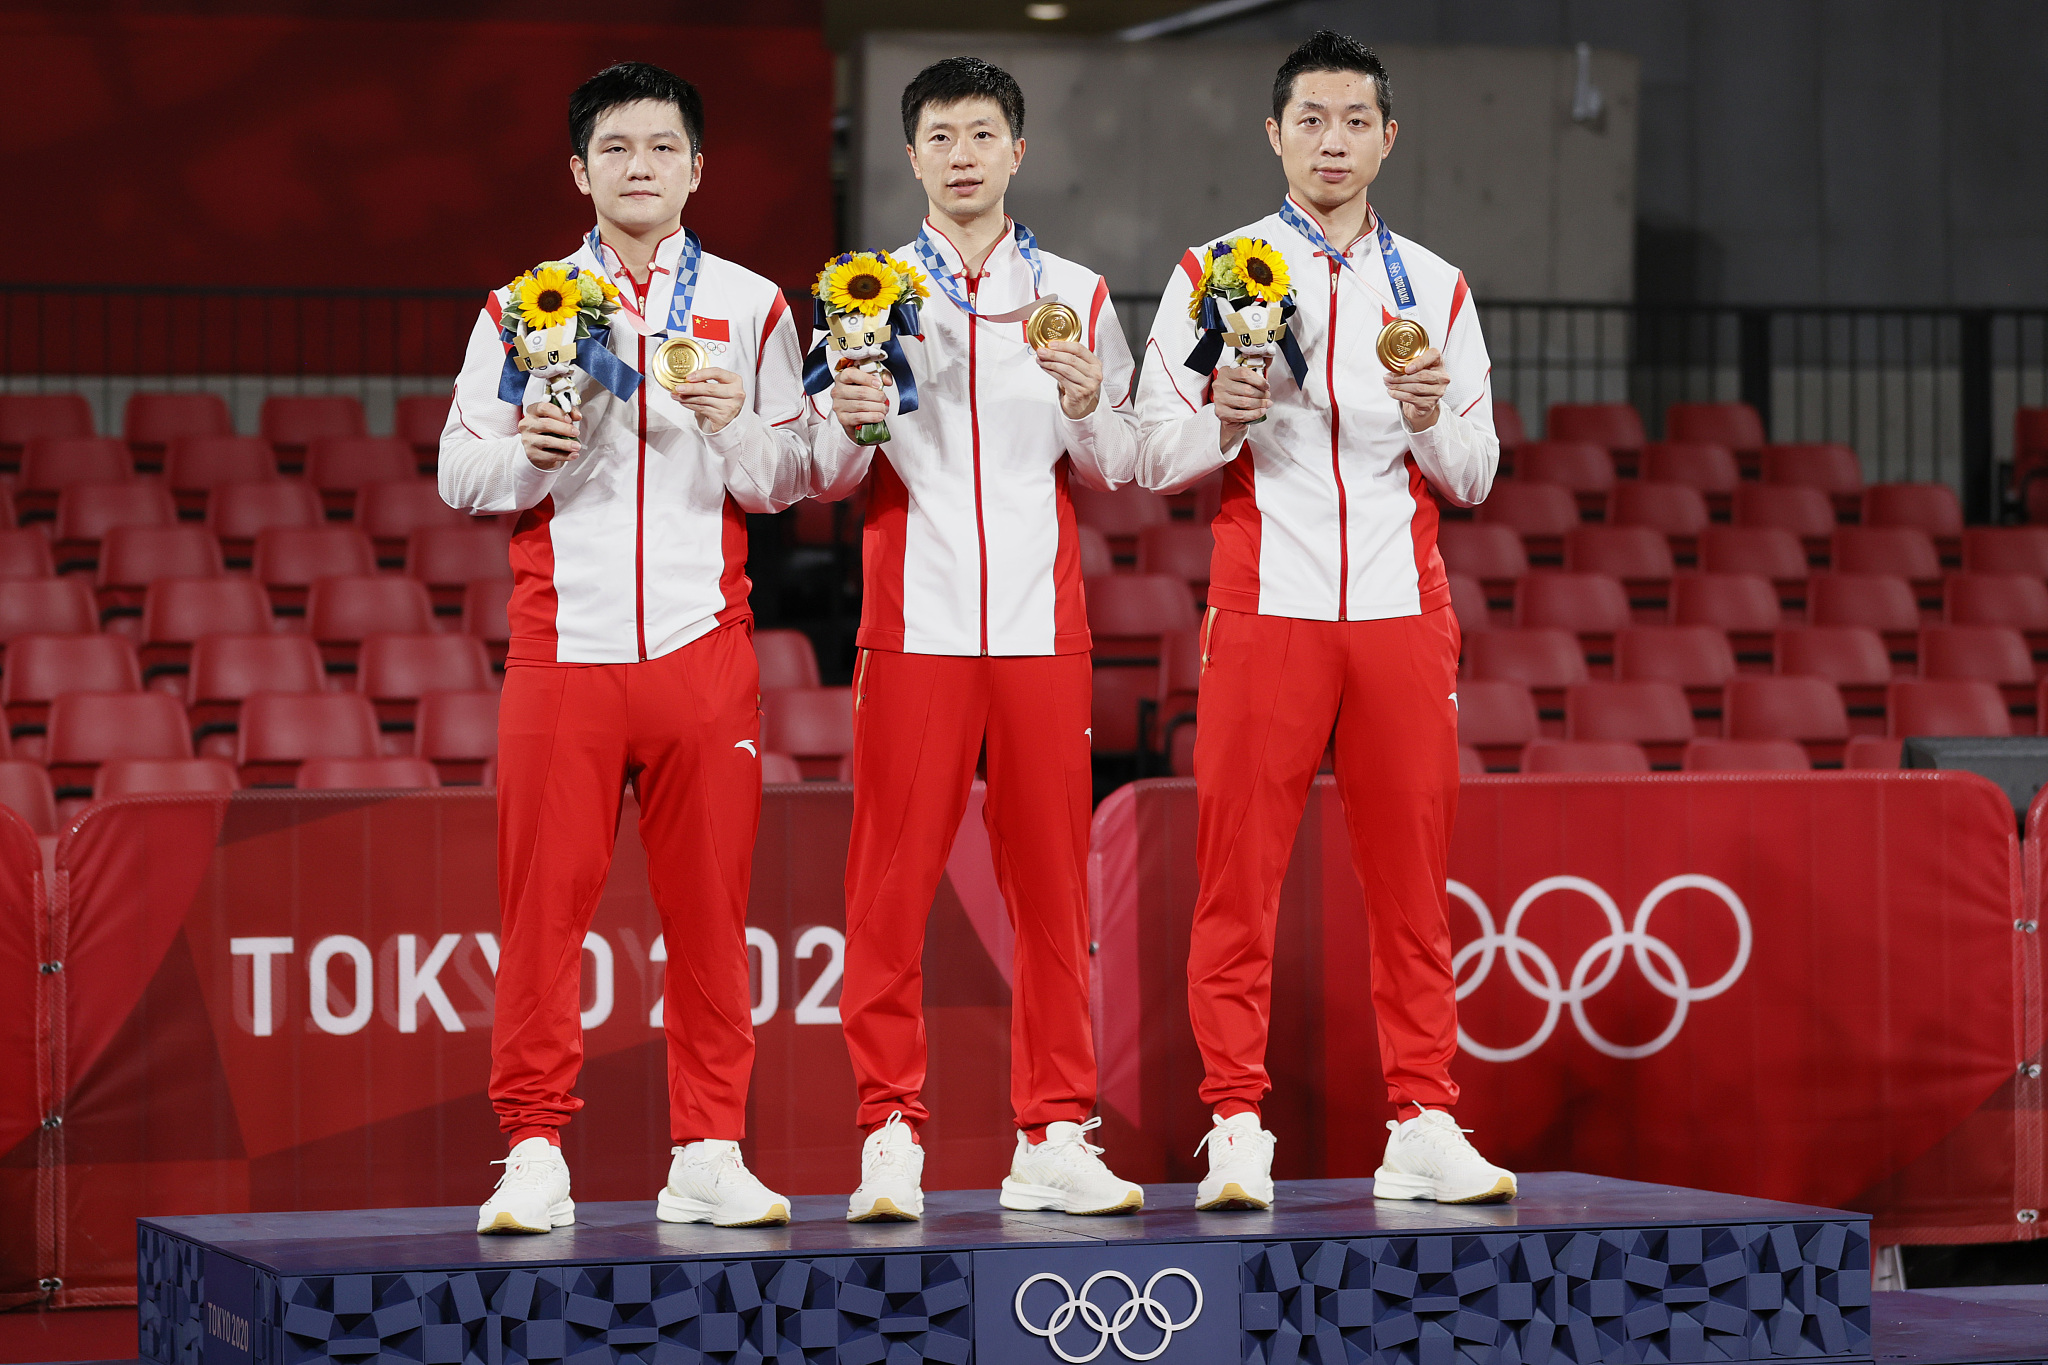 L-R: Fan Zhendong, Ma Long, and Xu Xin celebrate on the podium after winning the gold medal in the table tennis men's team final during the Tokyo 2020 Olympic Games in Tokyo, Japan, August 6, 2021. /CFP